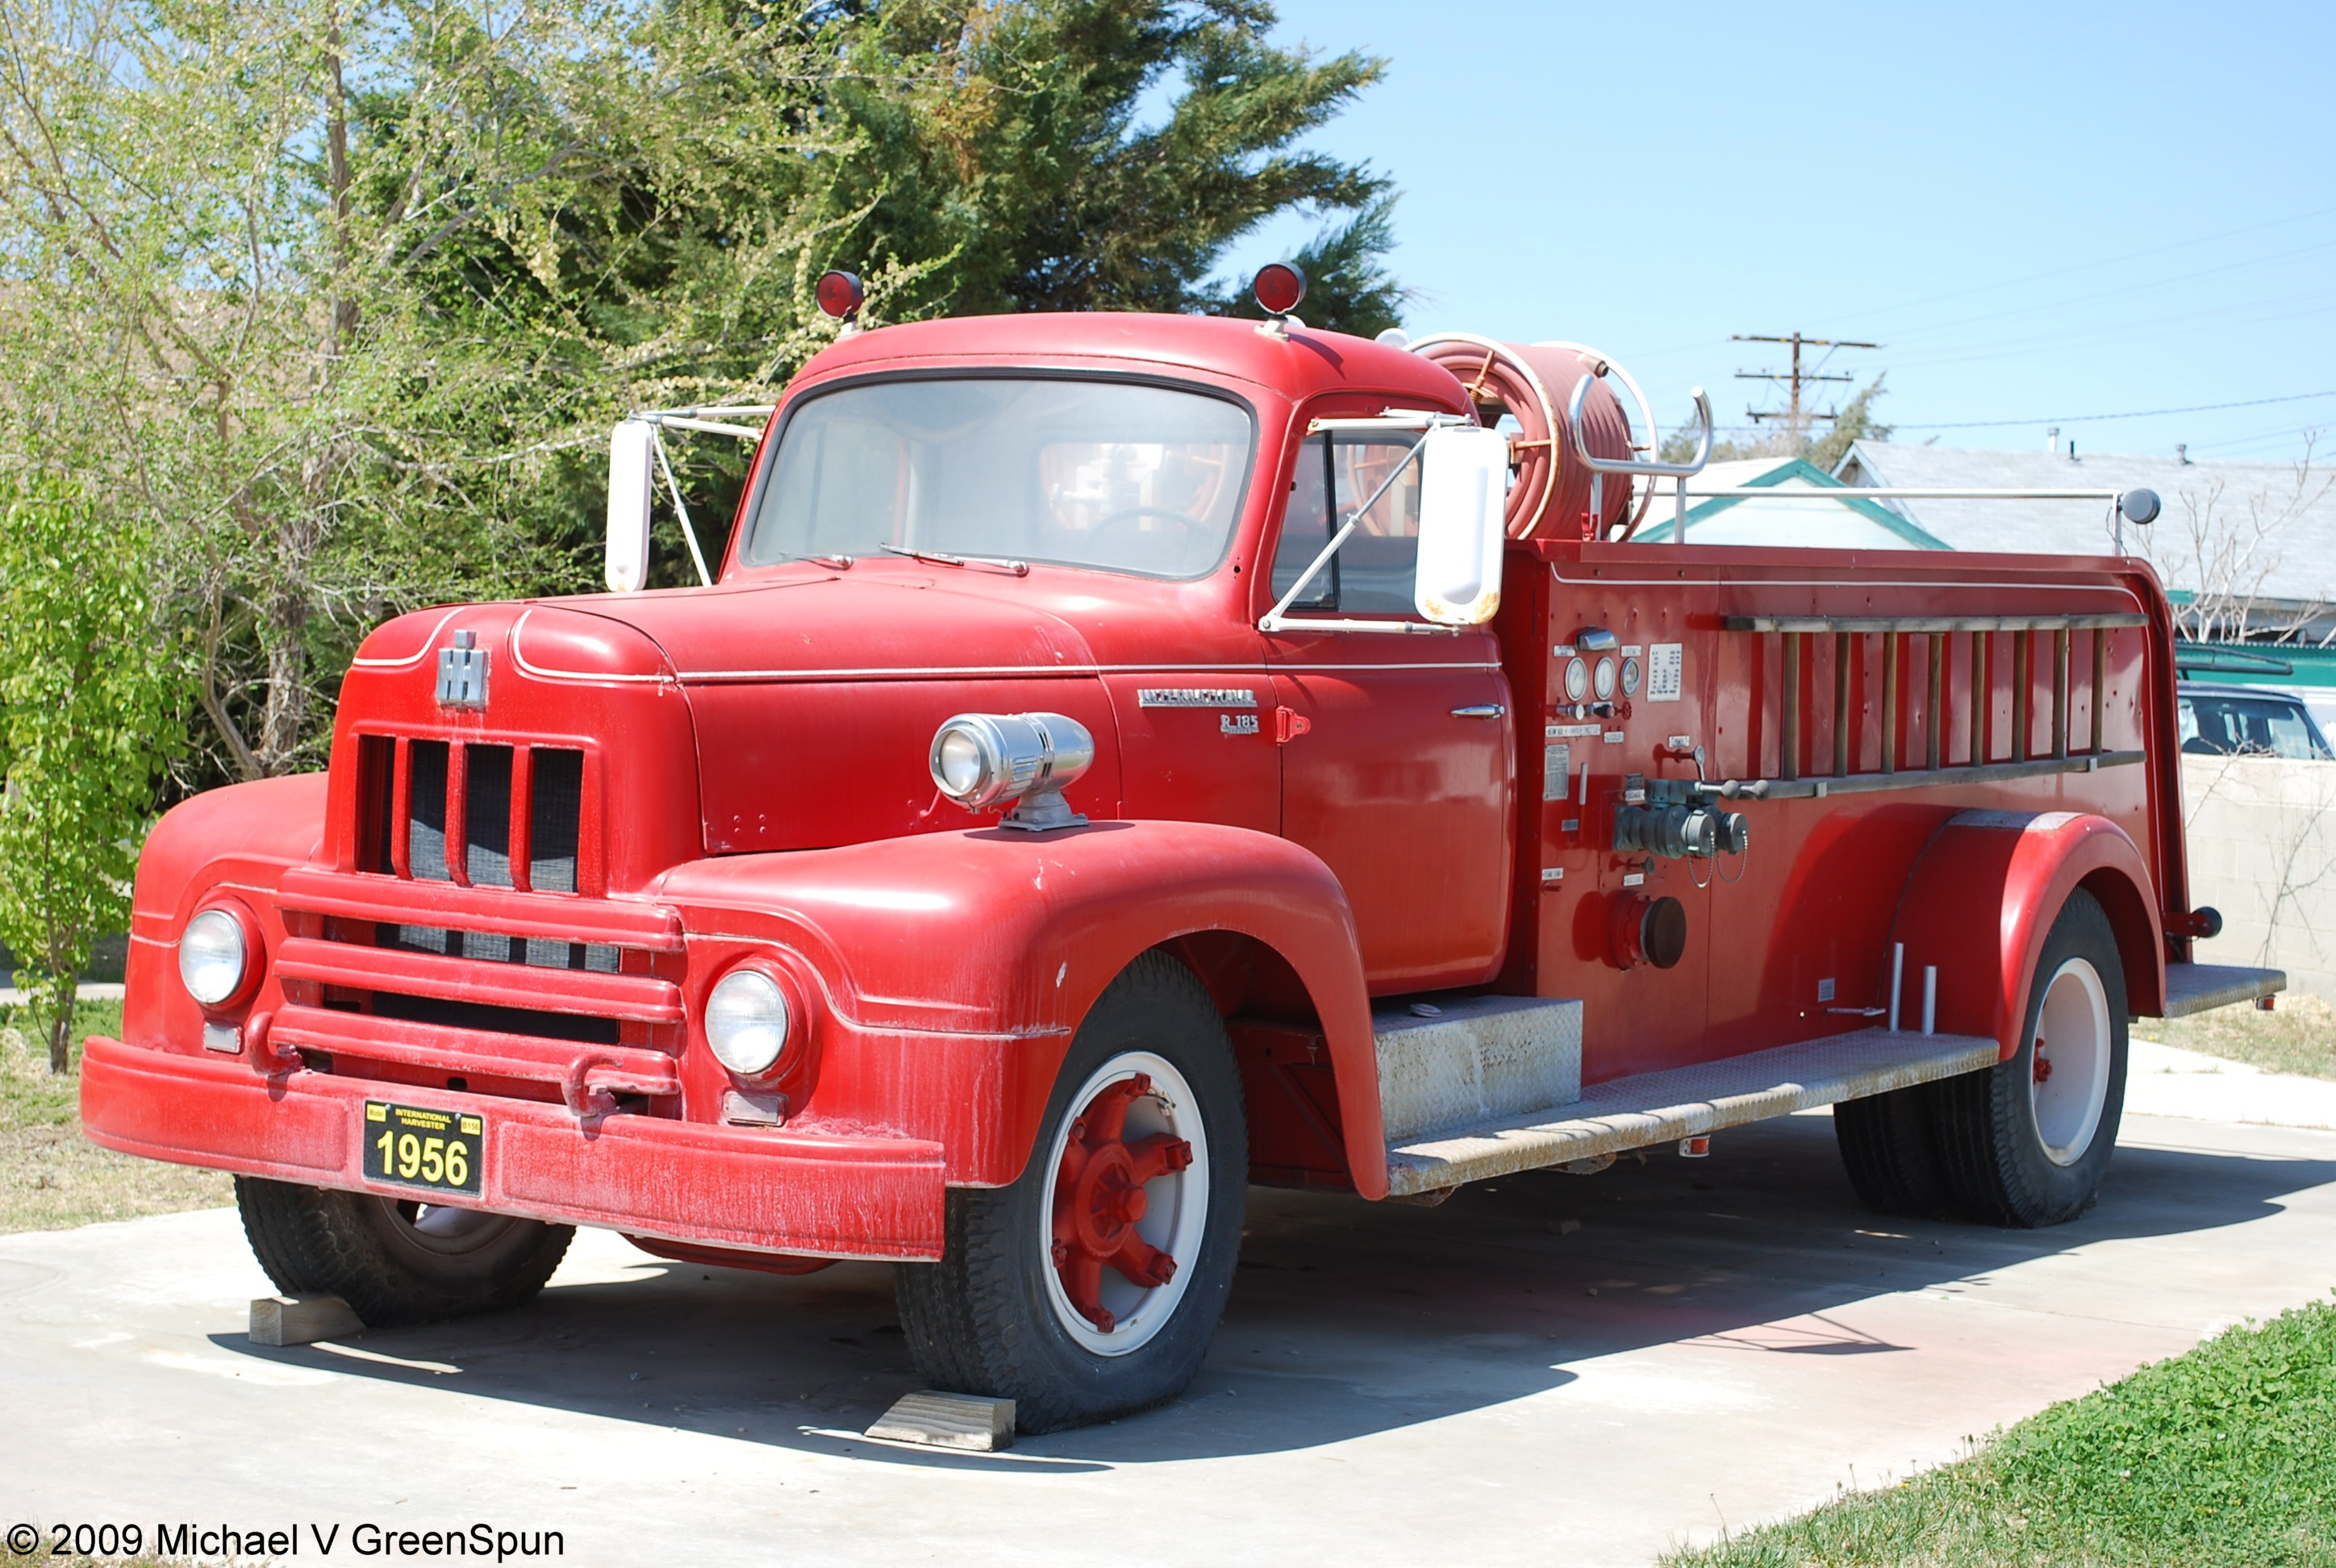 Fire Engine | Flickr - Photo Sharing!